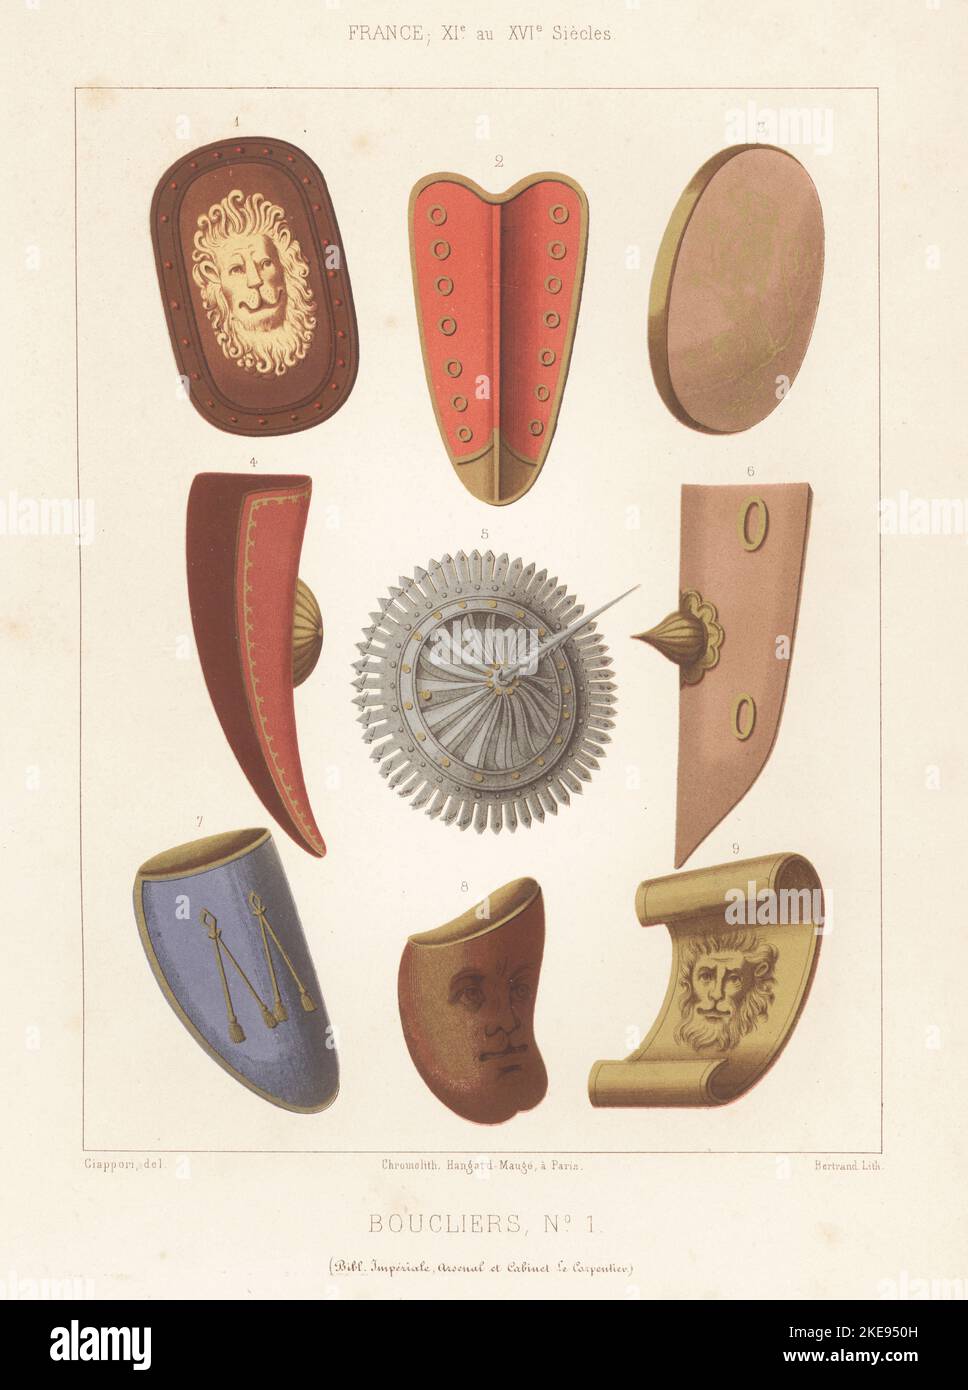 Military shields or bucklers, 11th to 16th centuries. 1,3,6 from a manuscript by Jean Fouquet, 5 from Mr. Carpentier's cabinet, and the others from MS 109 H, Bibliotheque de l'Arsenal. Boucliers, France, XIe au XVIe siecles. Chromolithograph by Bertrand after an illustration by Claudius Joseph Ciappori from Charles Louandre’s Les Arts Somptuaires, The Sumptuary Arts, Hangard-Mauge, Paris, 1858. Stock Photo